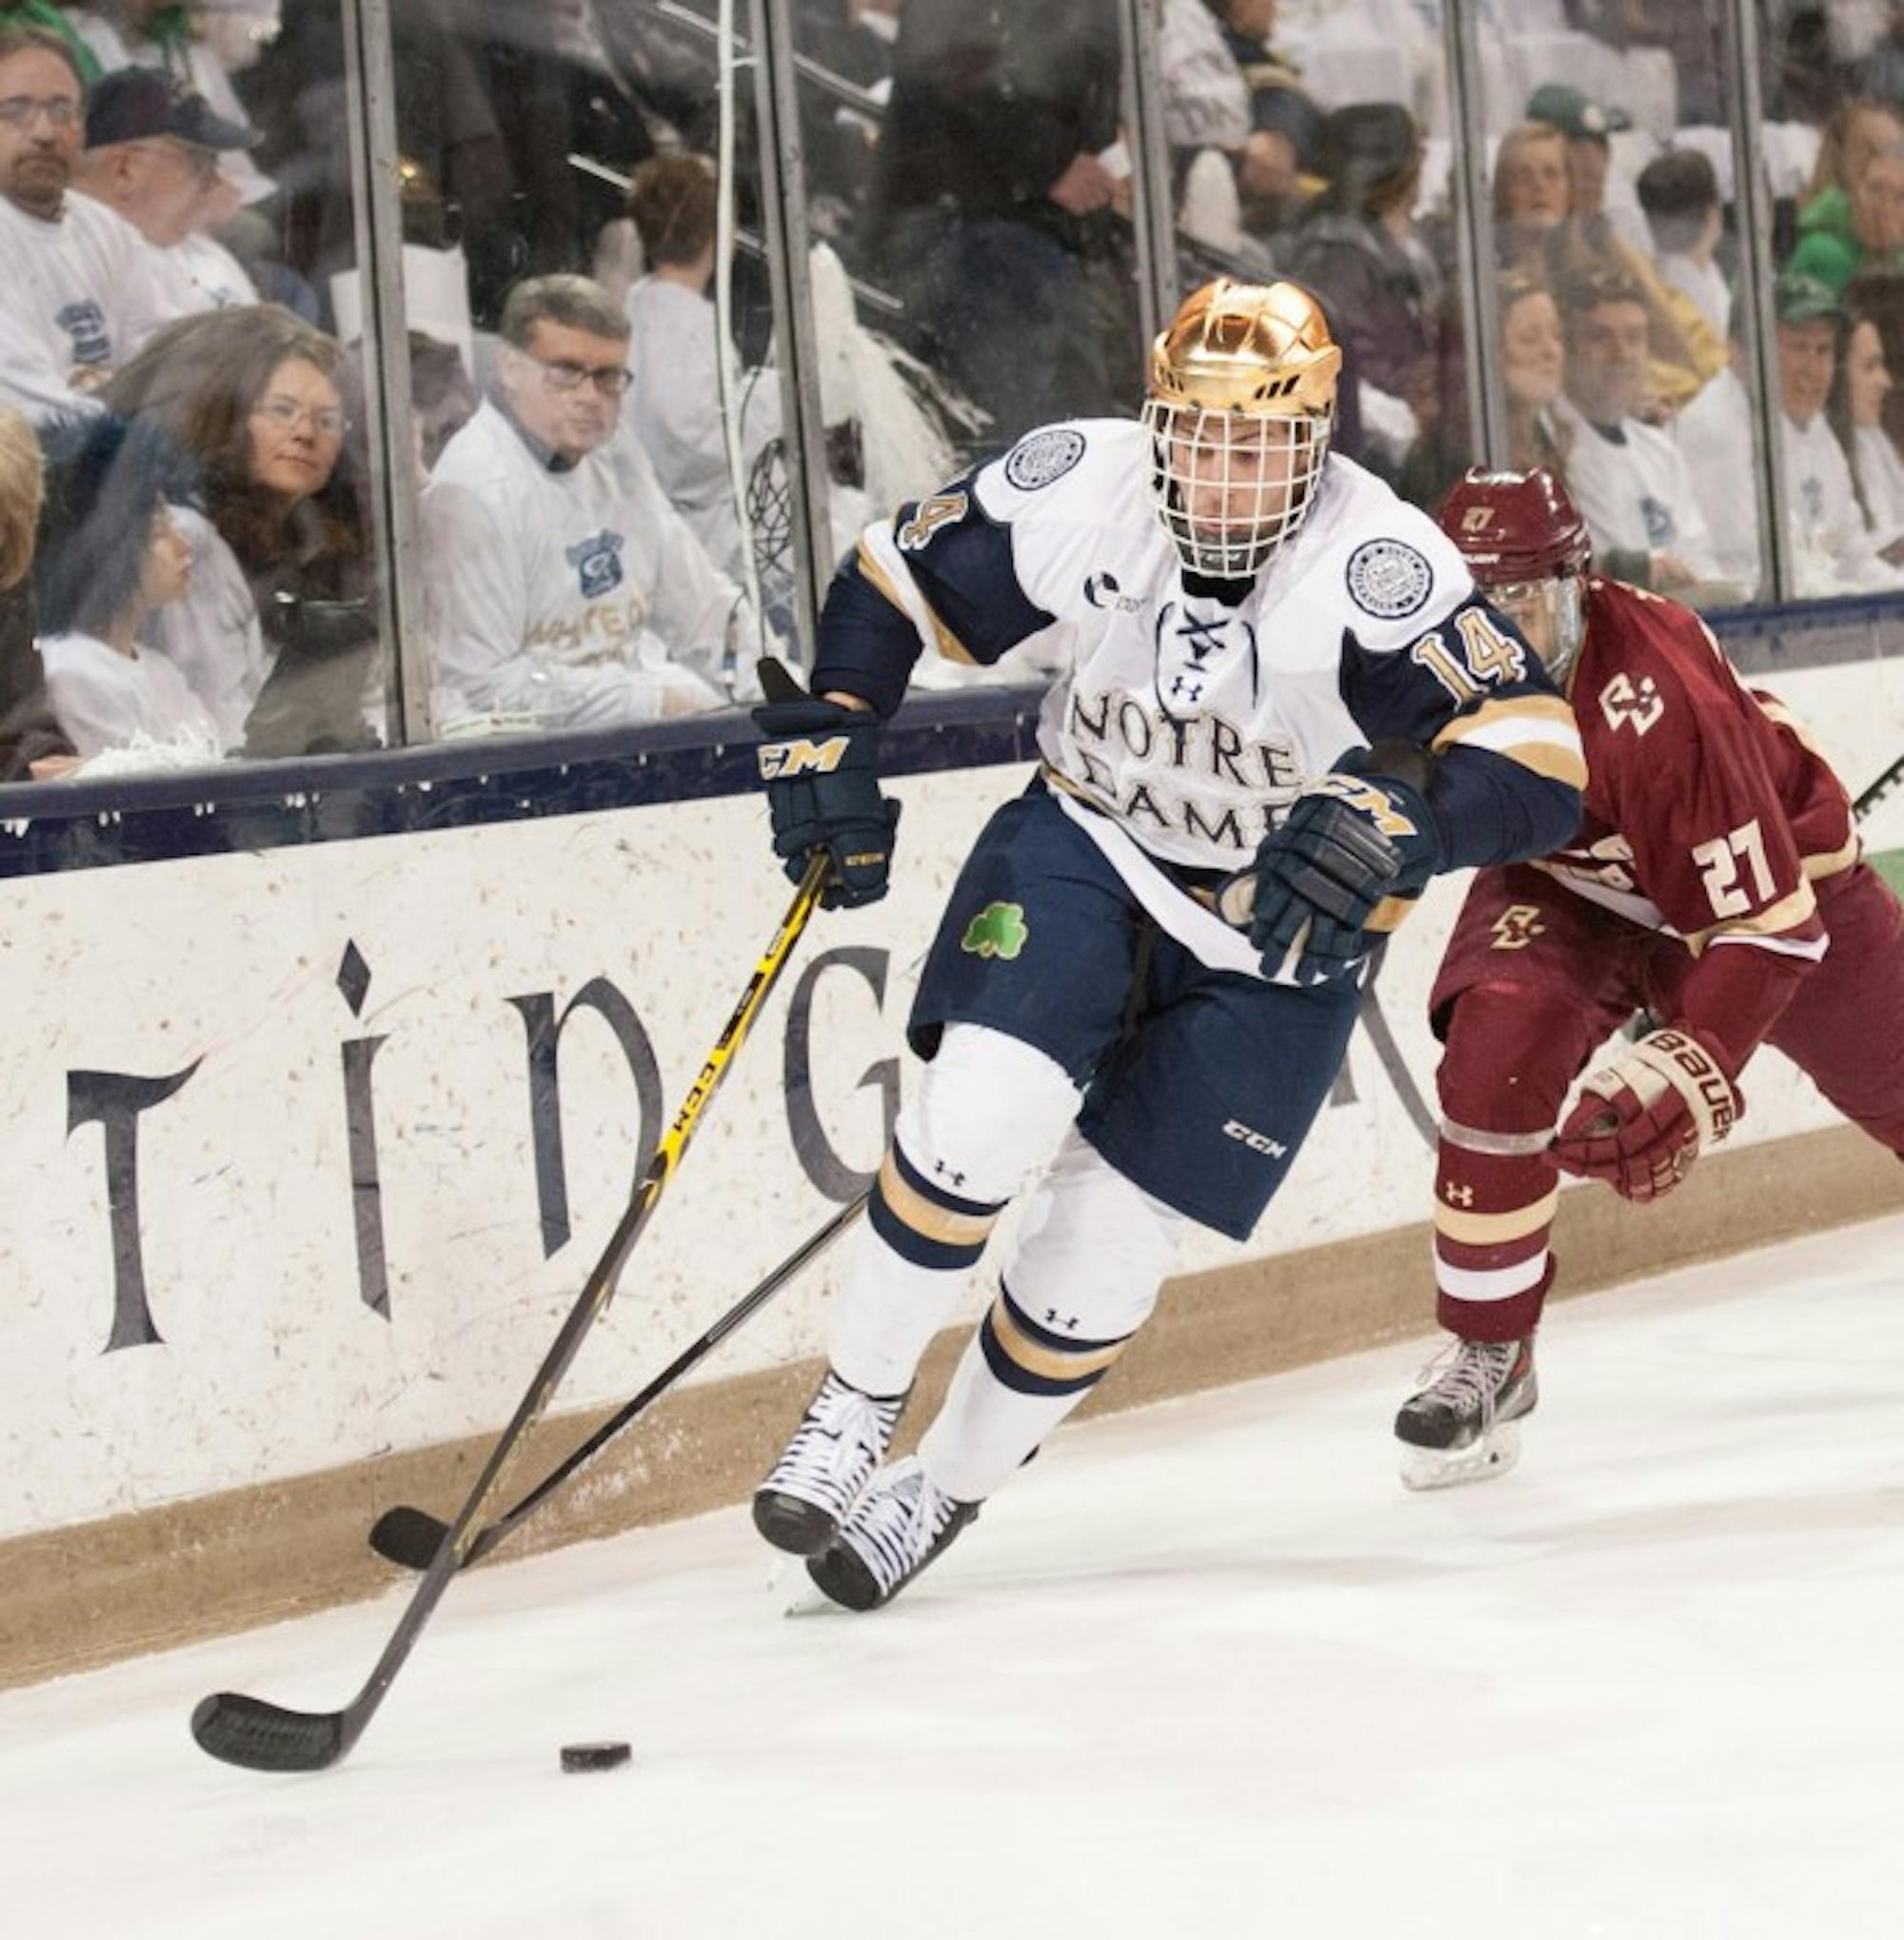 Senior center Thomas DiPauli skates along the boards during a 2-0 loss to Boston College on Feb. 28 at Purcell Pavilion. DiPauli totaled 8 goals and 21 assists last season.